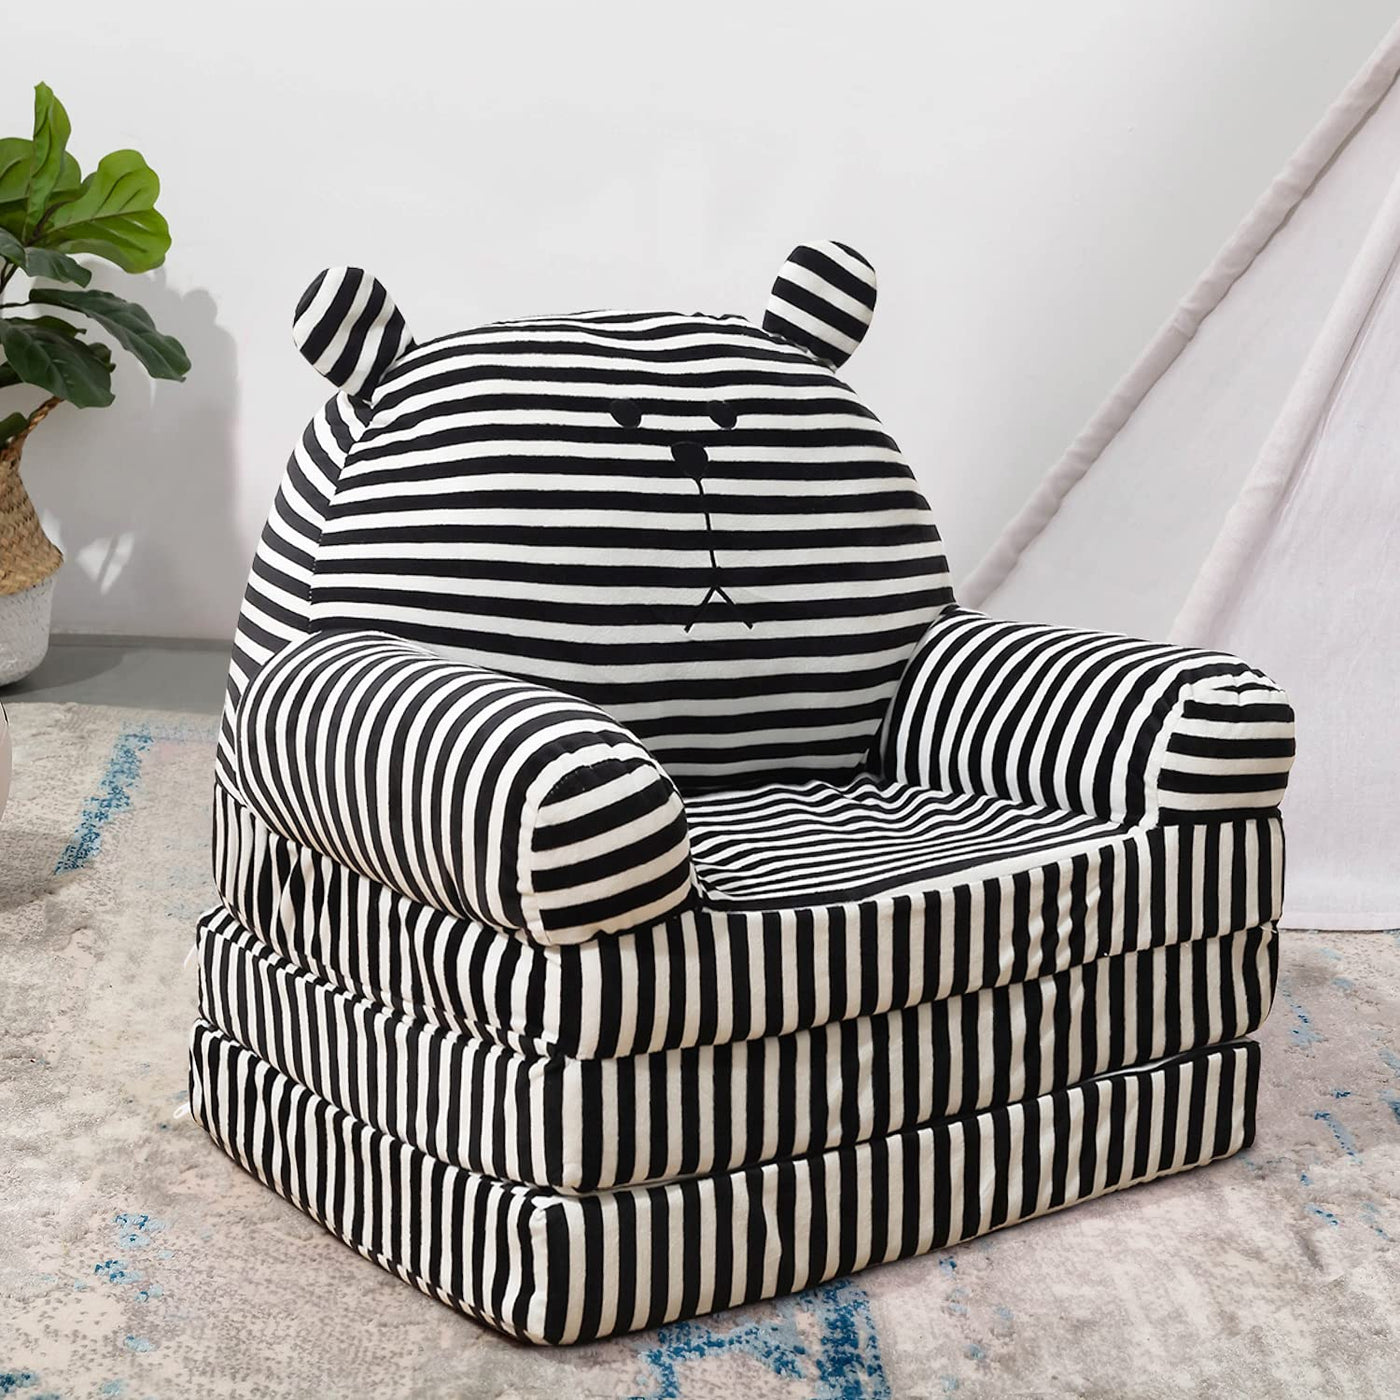 MAXYOYO Plush Foldable Kids Sofa, Bear Shape Children Couch Backrest Armchair Bed with Pocket